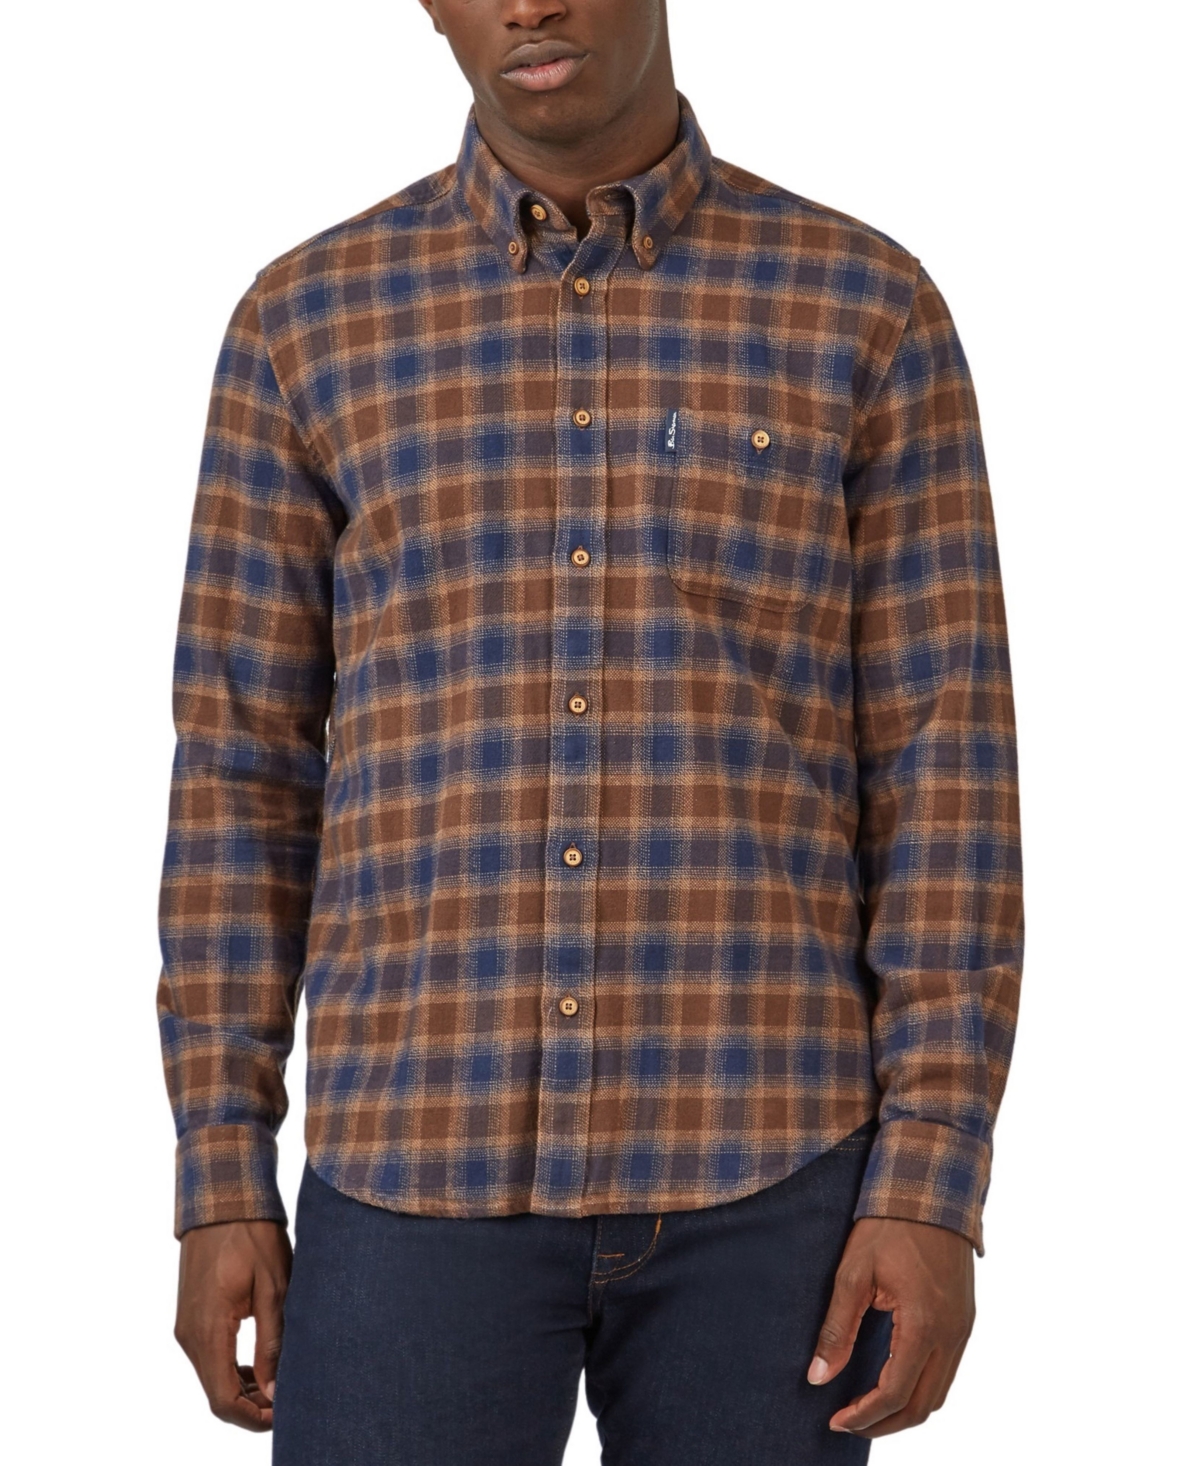 Men's Brushed Ombre Check Shirt - Peat